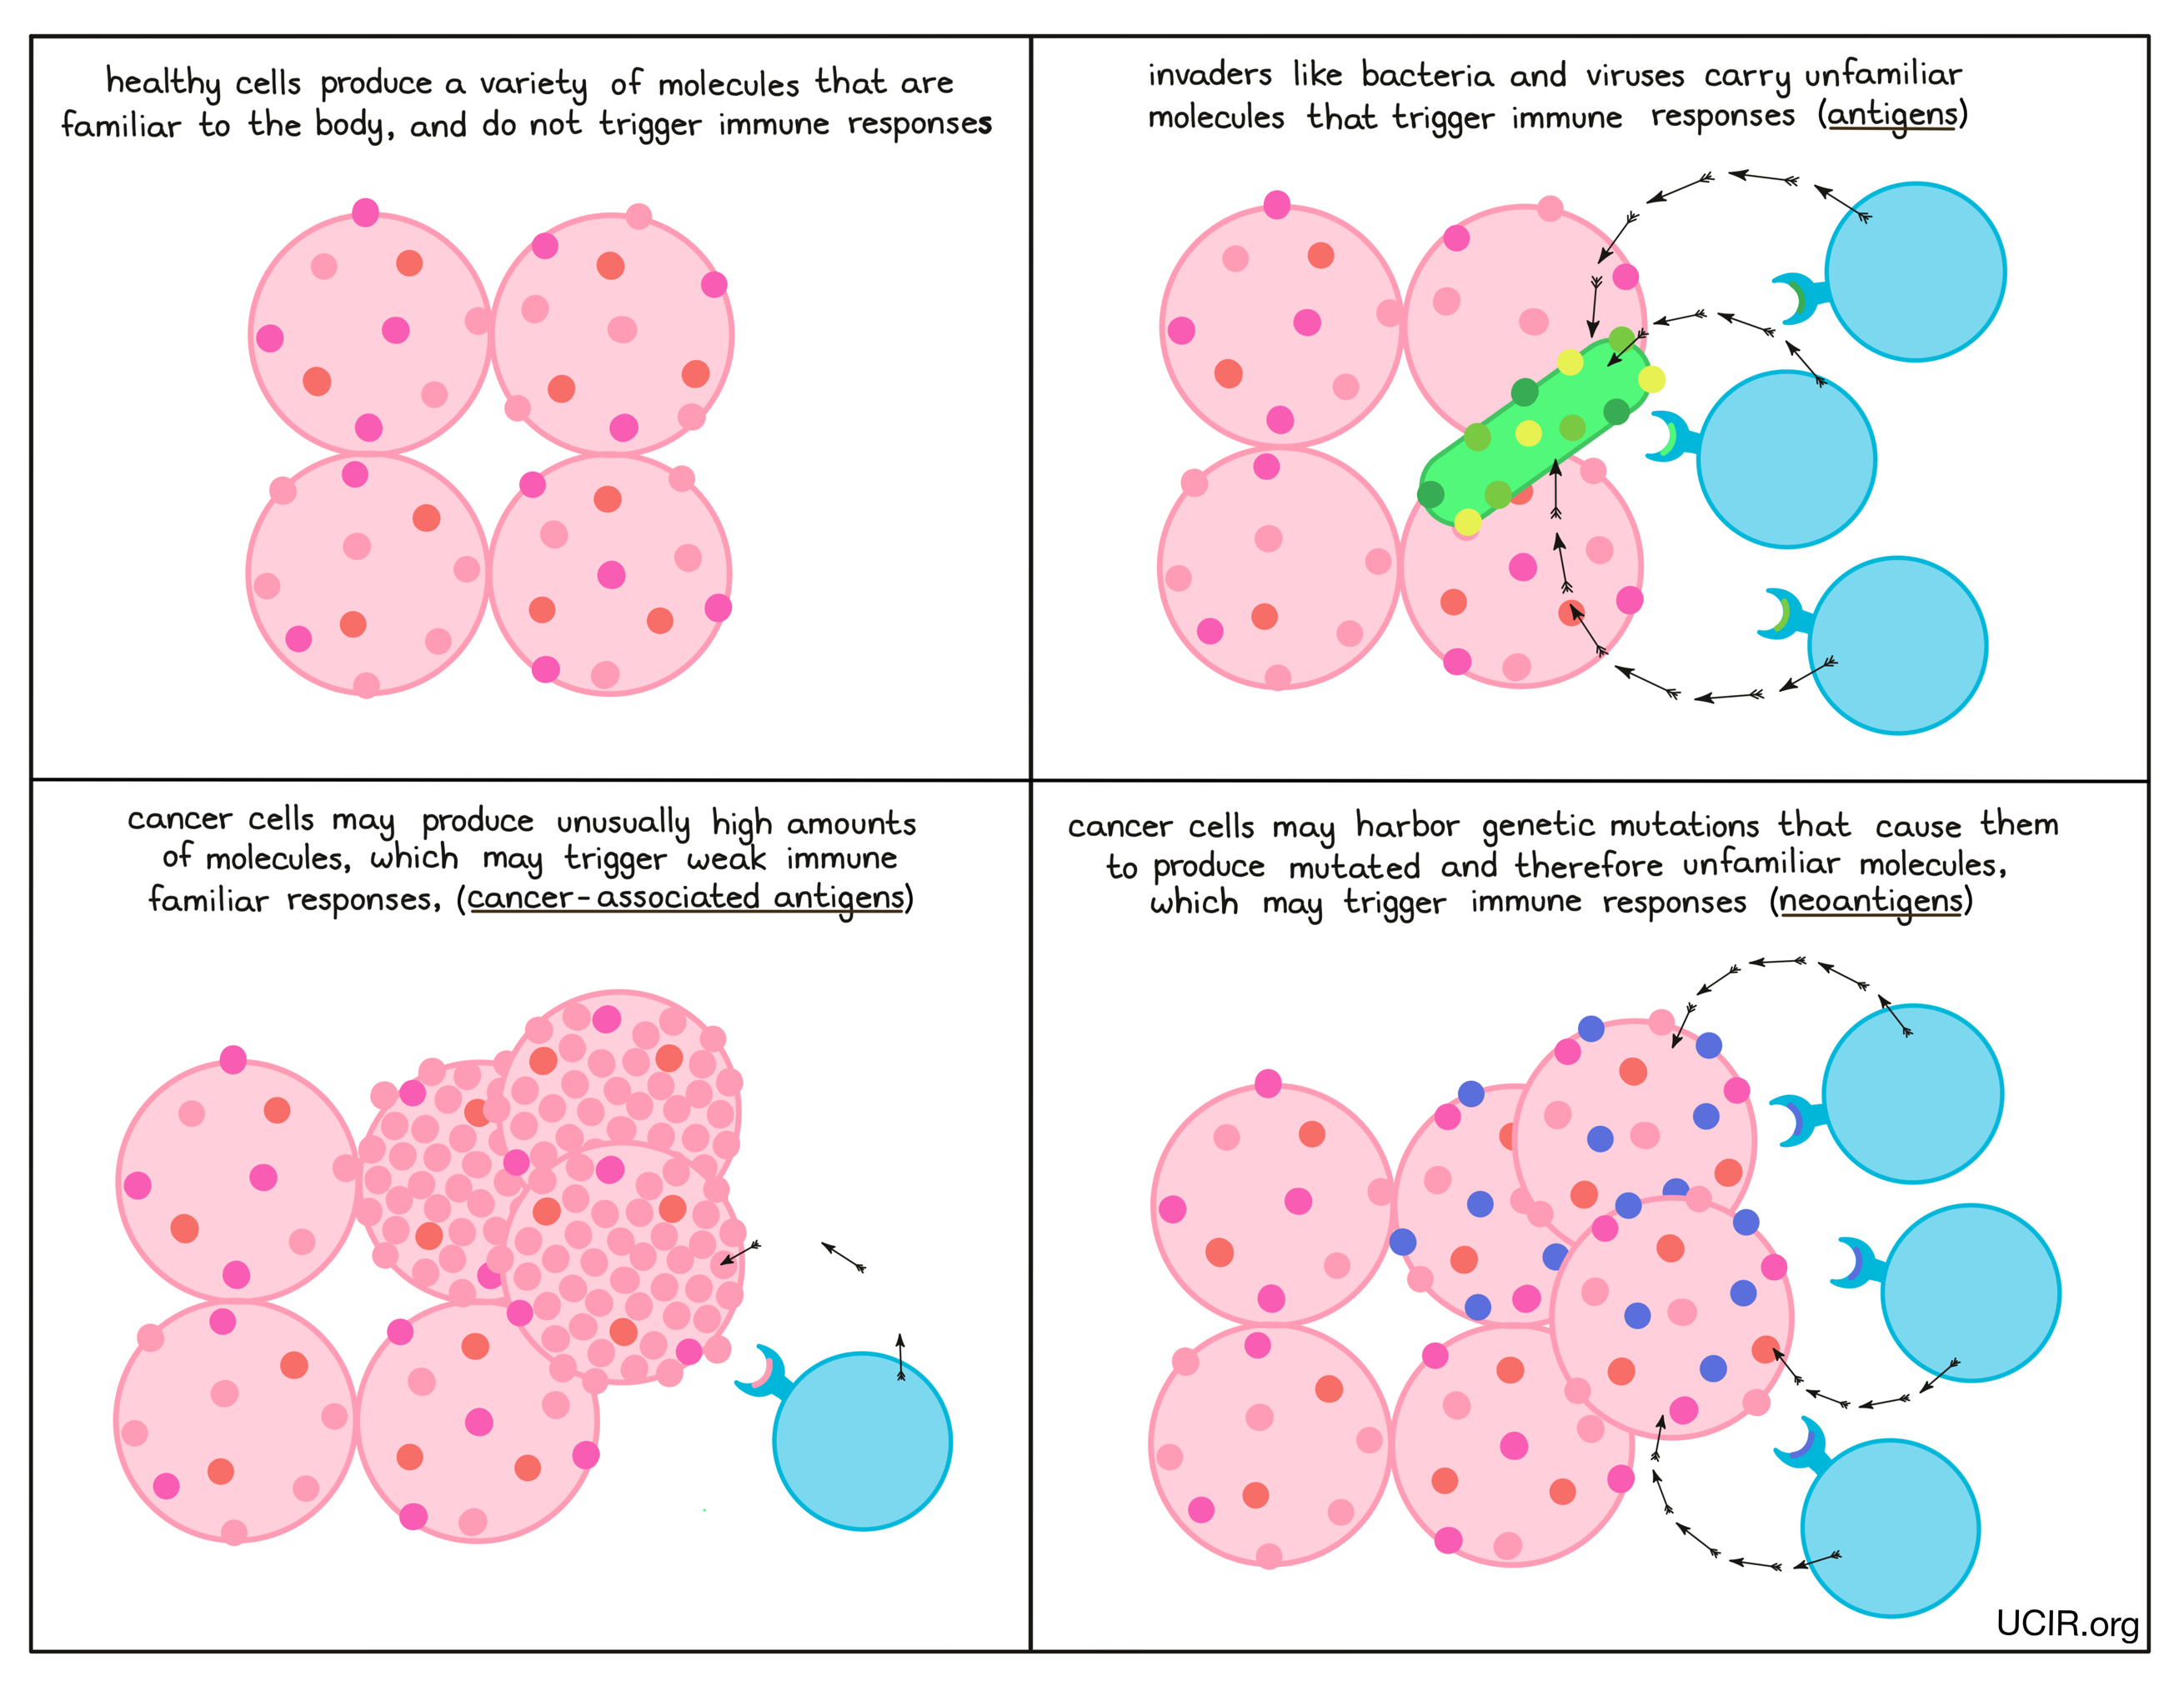 Depiction of healthy and cancerous cells and the respective immune system responses they trigger.